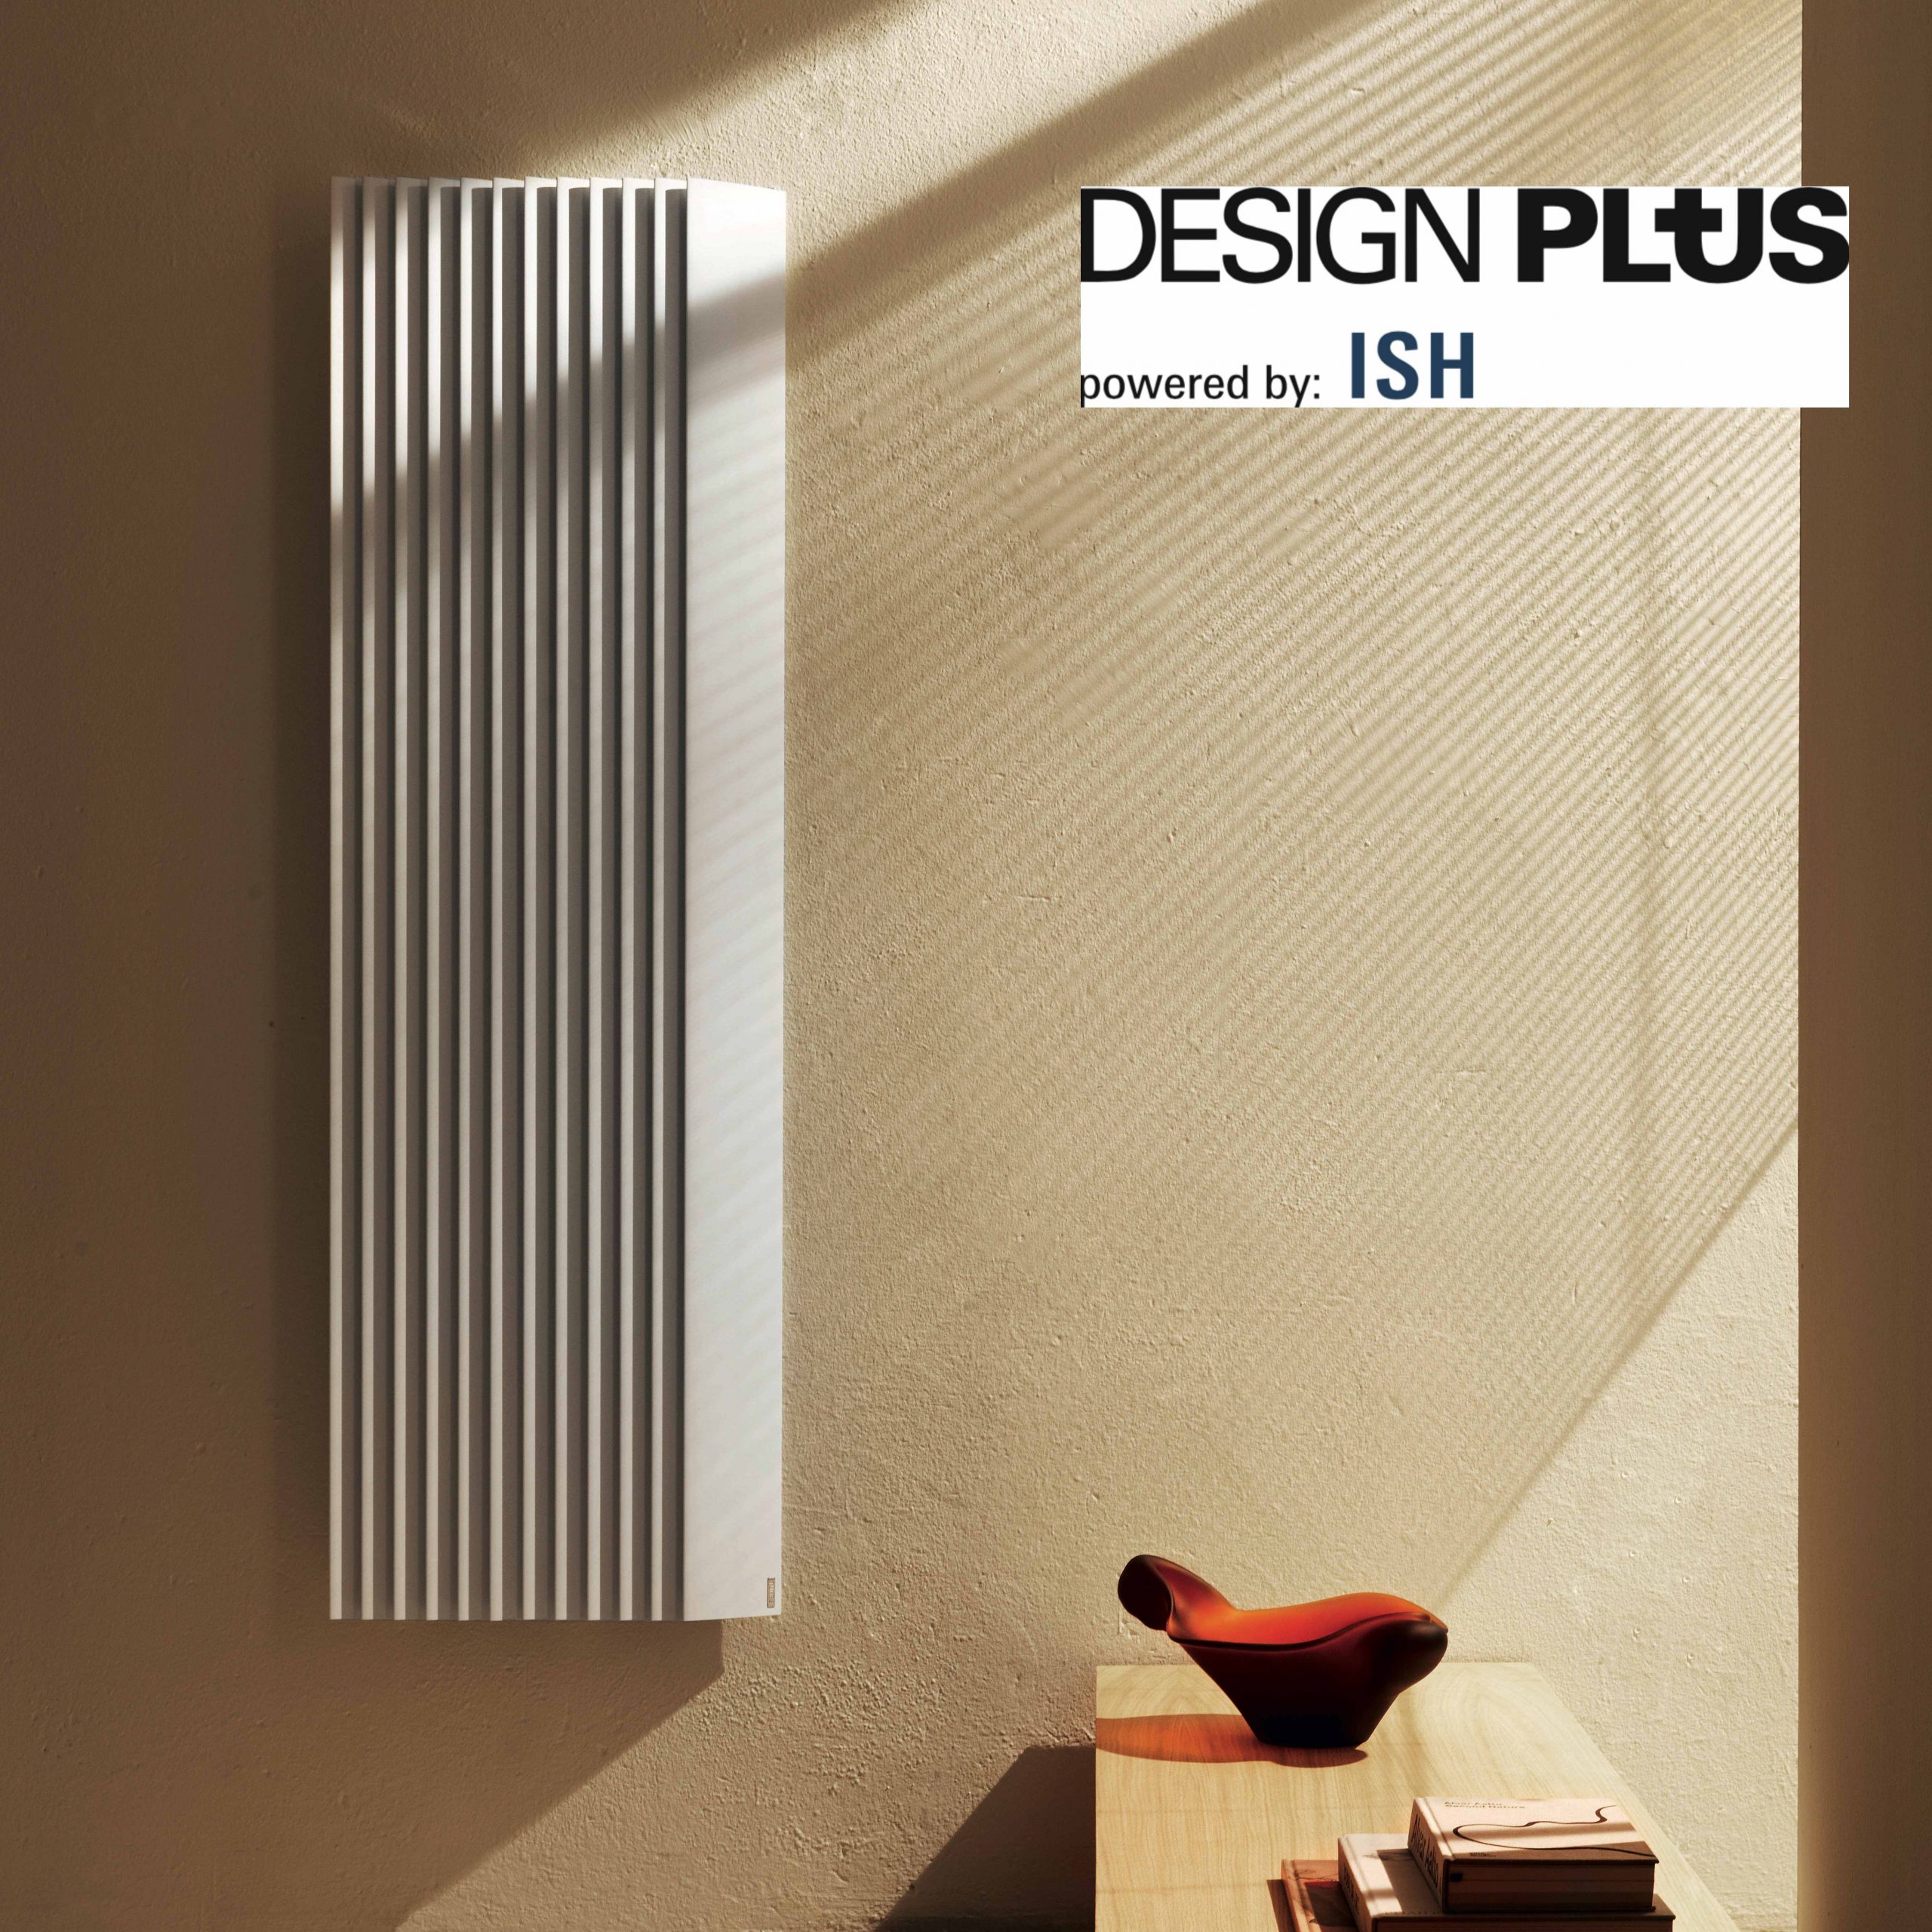 Step-by-Step vince il Design Plus powered by ISH 2019